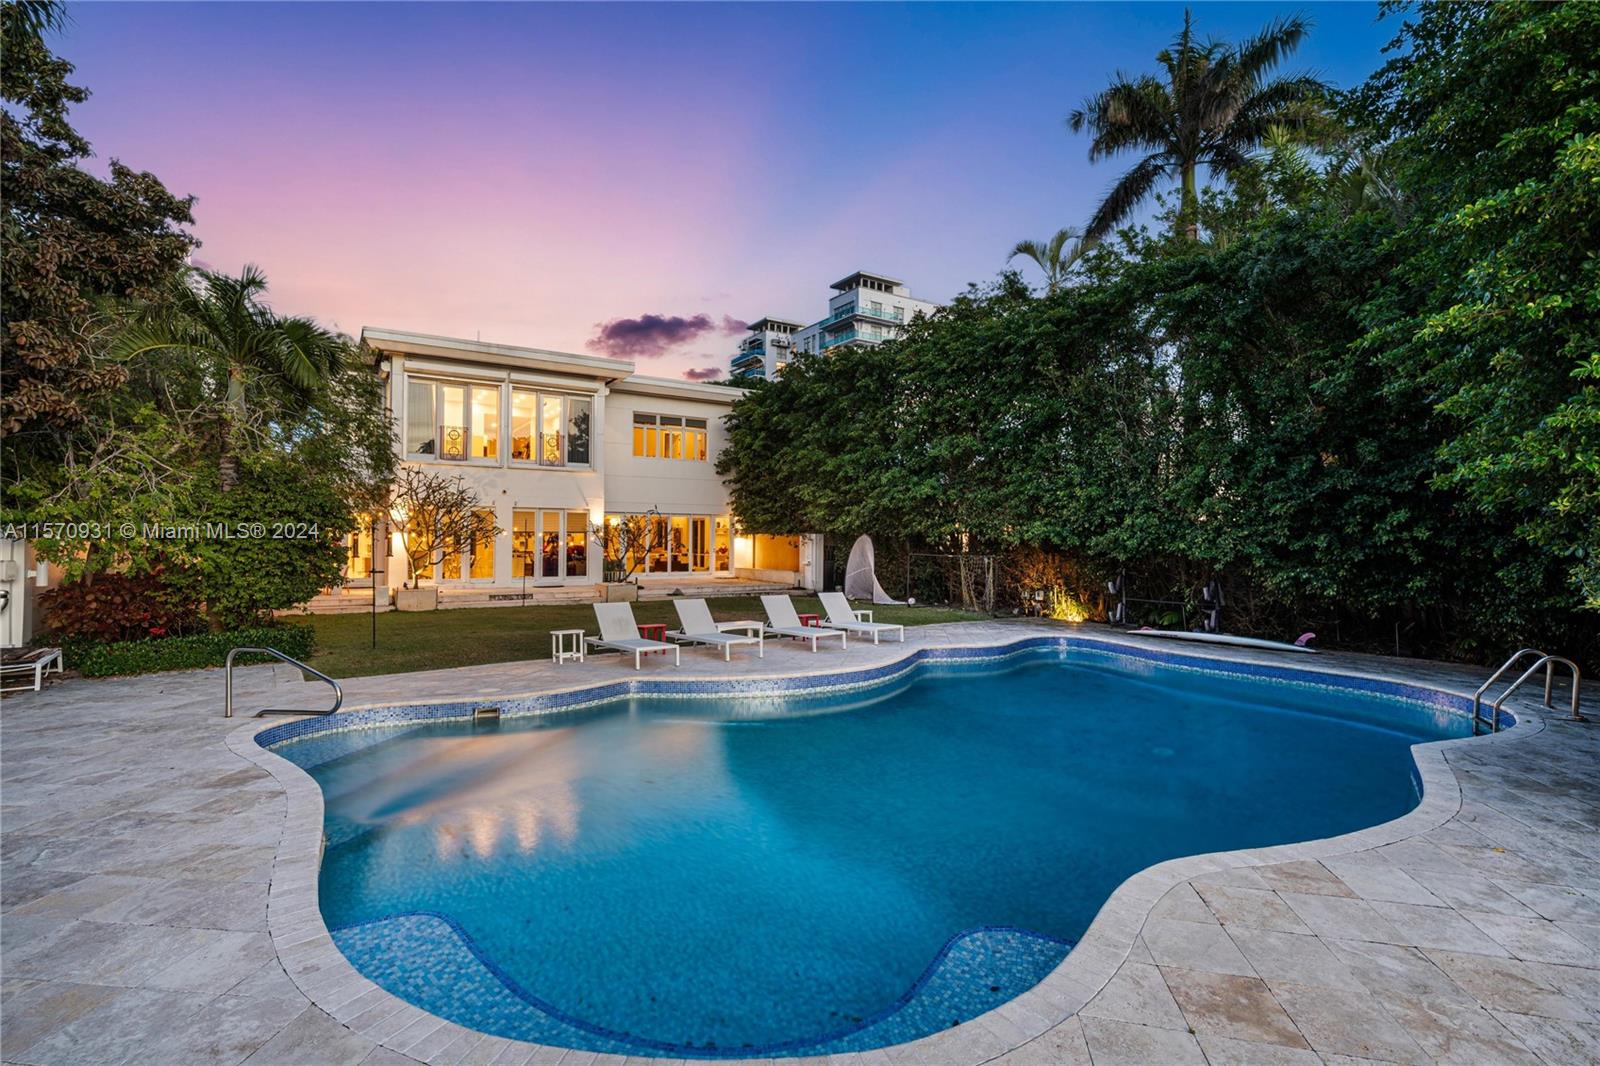 Gorgeous contemporary masterpiece nestled on this expansive 16,200 SF lot within the prestigious and guarded enclave Allison Island in Miami Beach. This Deco waterfront epitomizes perfection in every way. Completely renovated w/modern floor plan, perfect for entertaining. 6,200 sq, 7 bedrooms 5.5 bth + add'l bed/off/gym & 2 car gar. is move-in ready.Top-line Appliances & finishes with stunning water views, beautiful oversized  pool w/gls tiles & LED lighting. 45 KW gas gen. w/auto transfer switch & powers entire home. Stunning SUNSET WATERVIEWS.